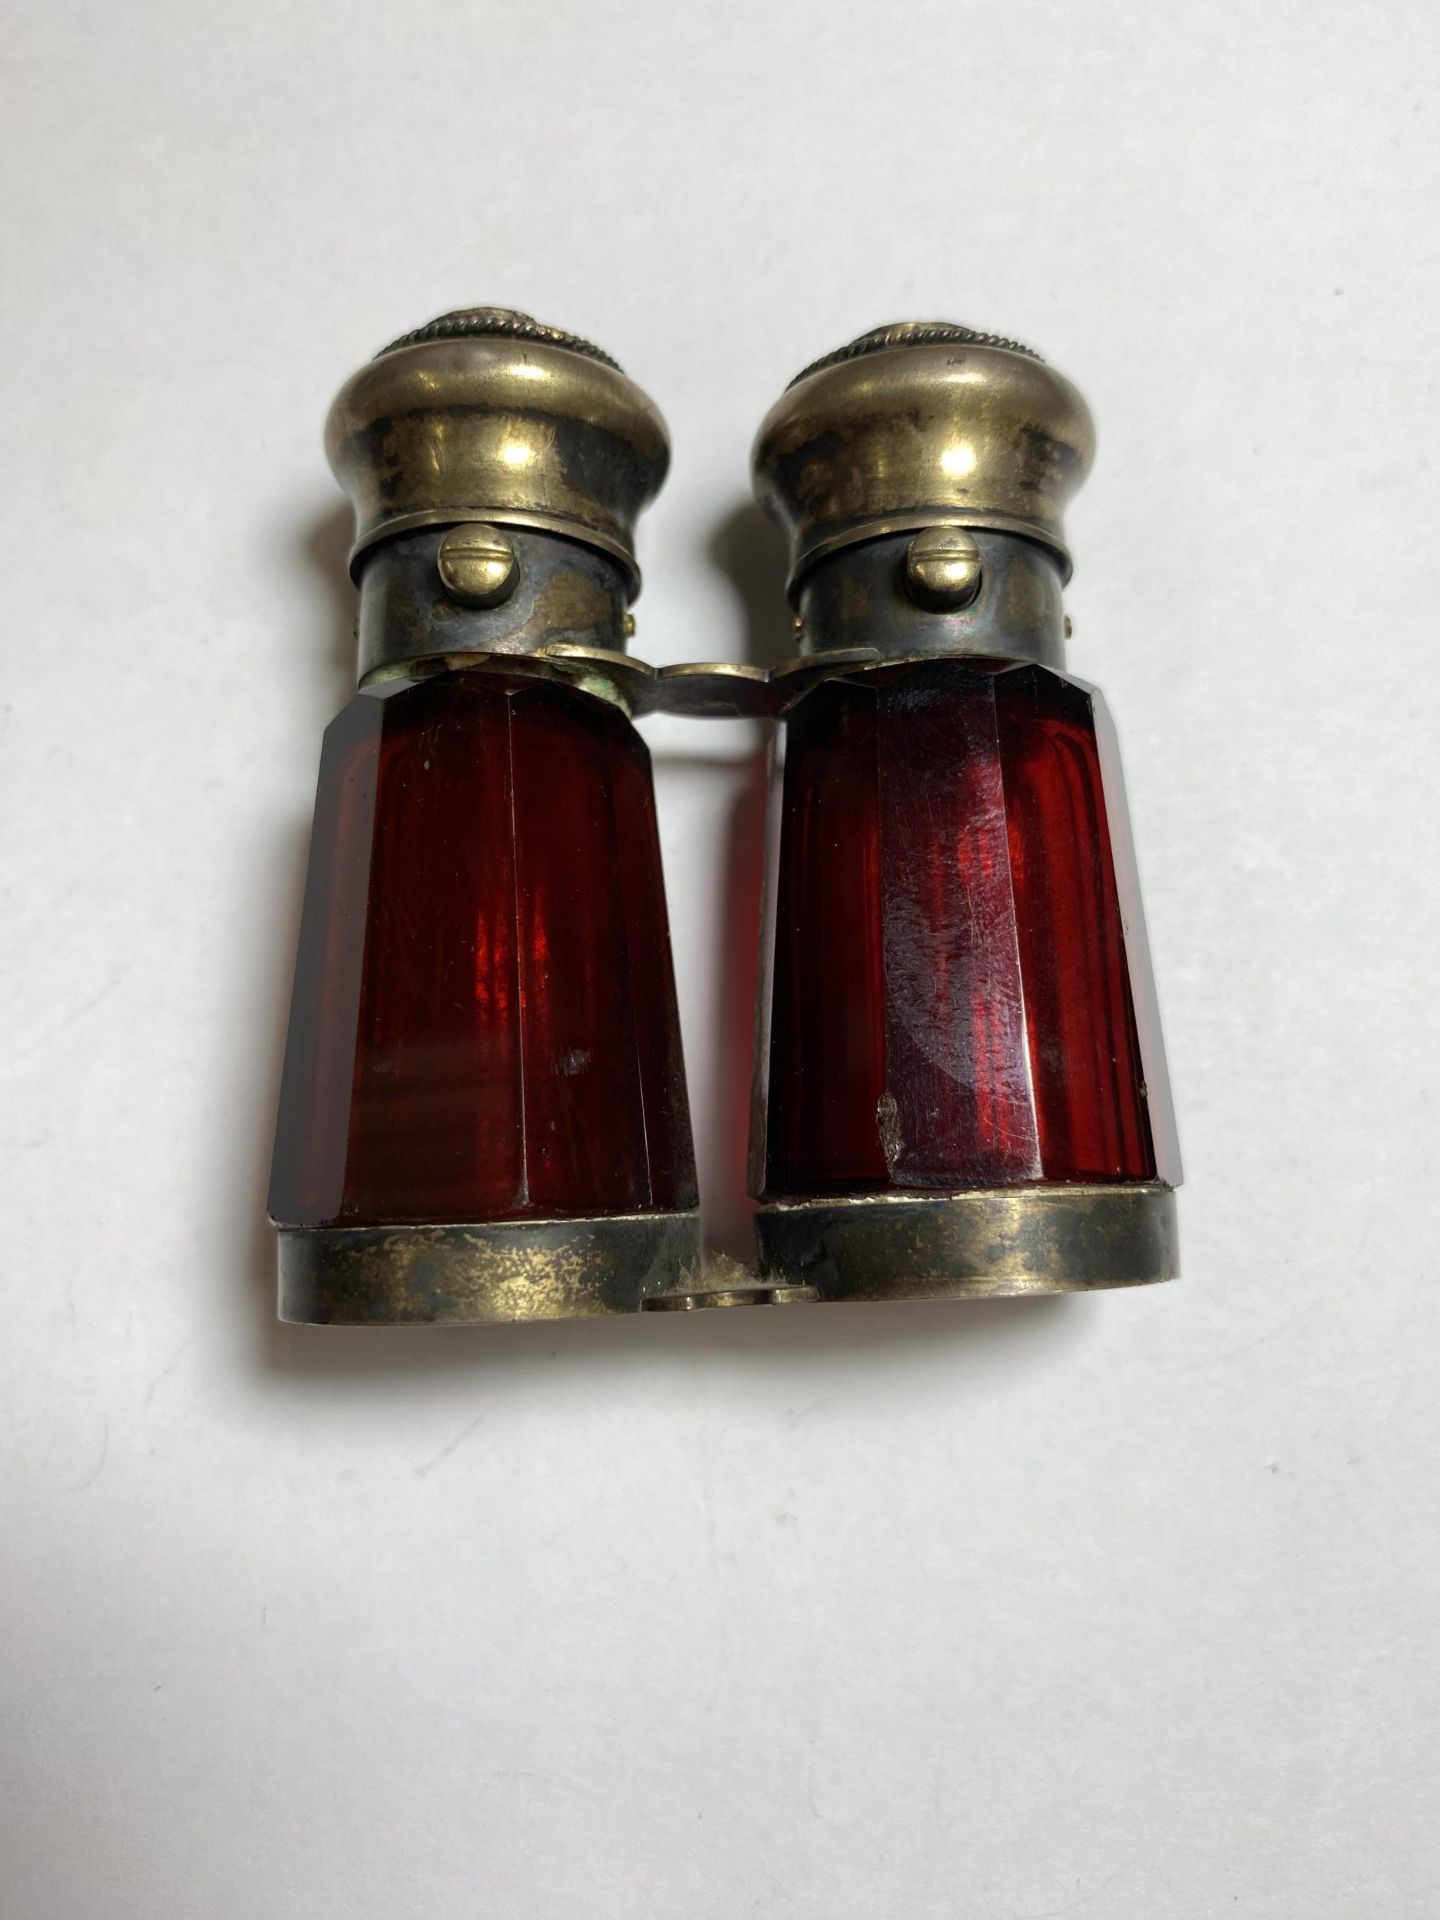 A VINTAGE CRANBERRY GLASS AND METAL DOUBLE PERFUME BOTTLE MODELLED IN THE FORM OF OPERA GLASSES